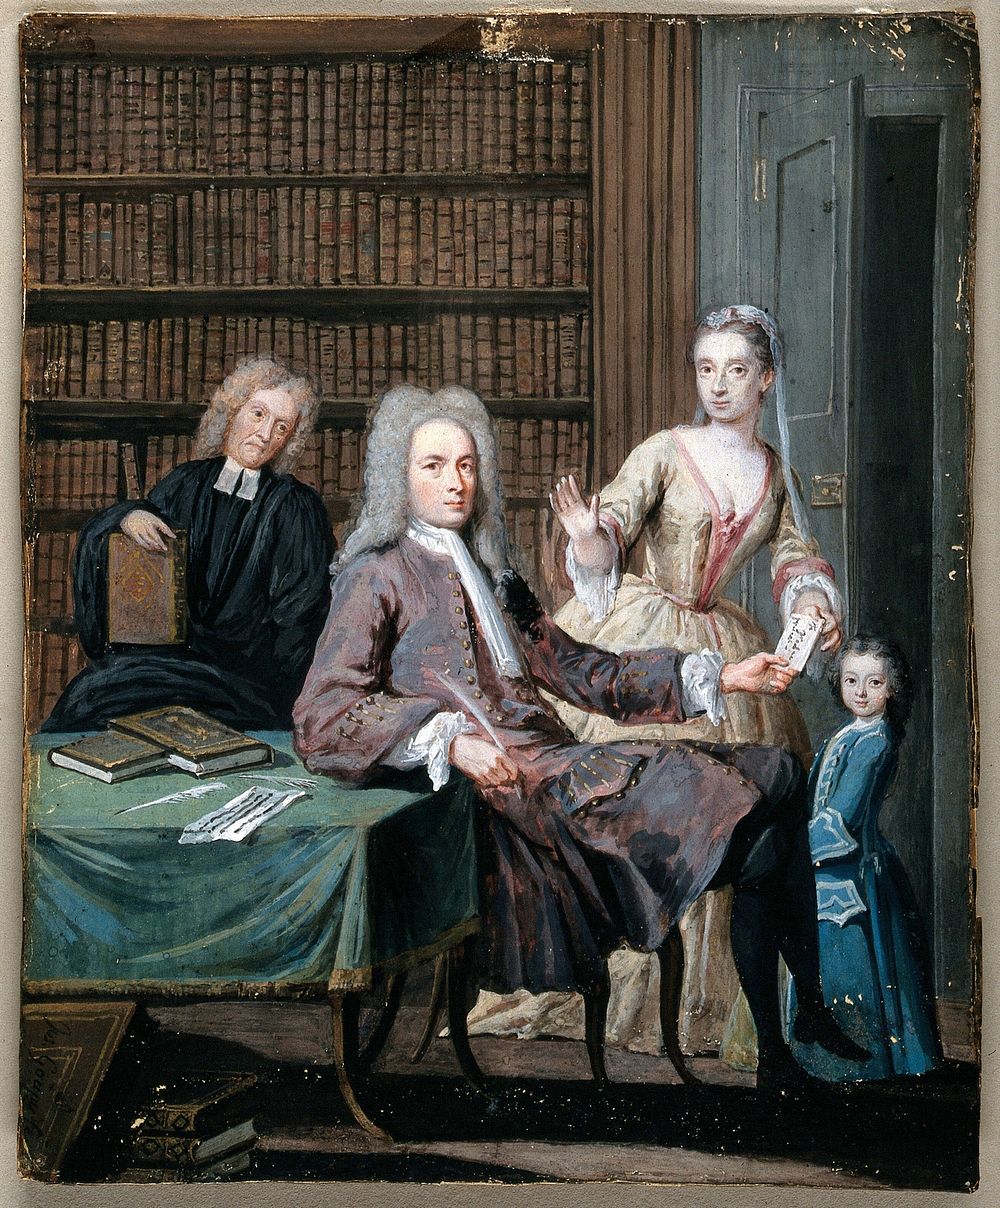 Jean Misaubin and his family. Gouache painting by Joseph Goupy, 172-.